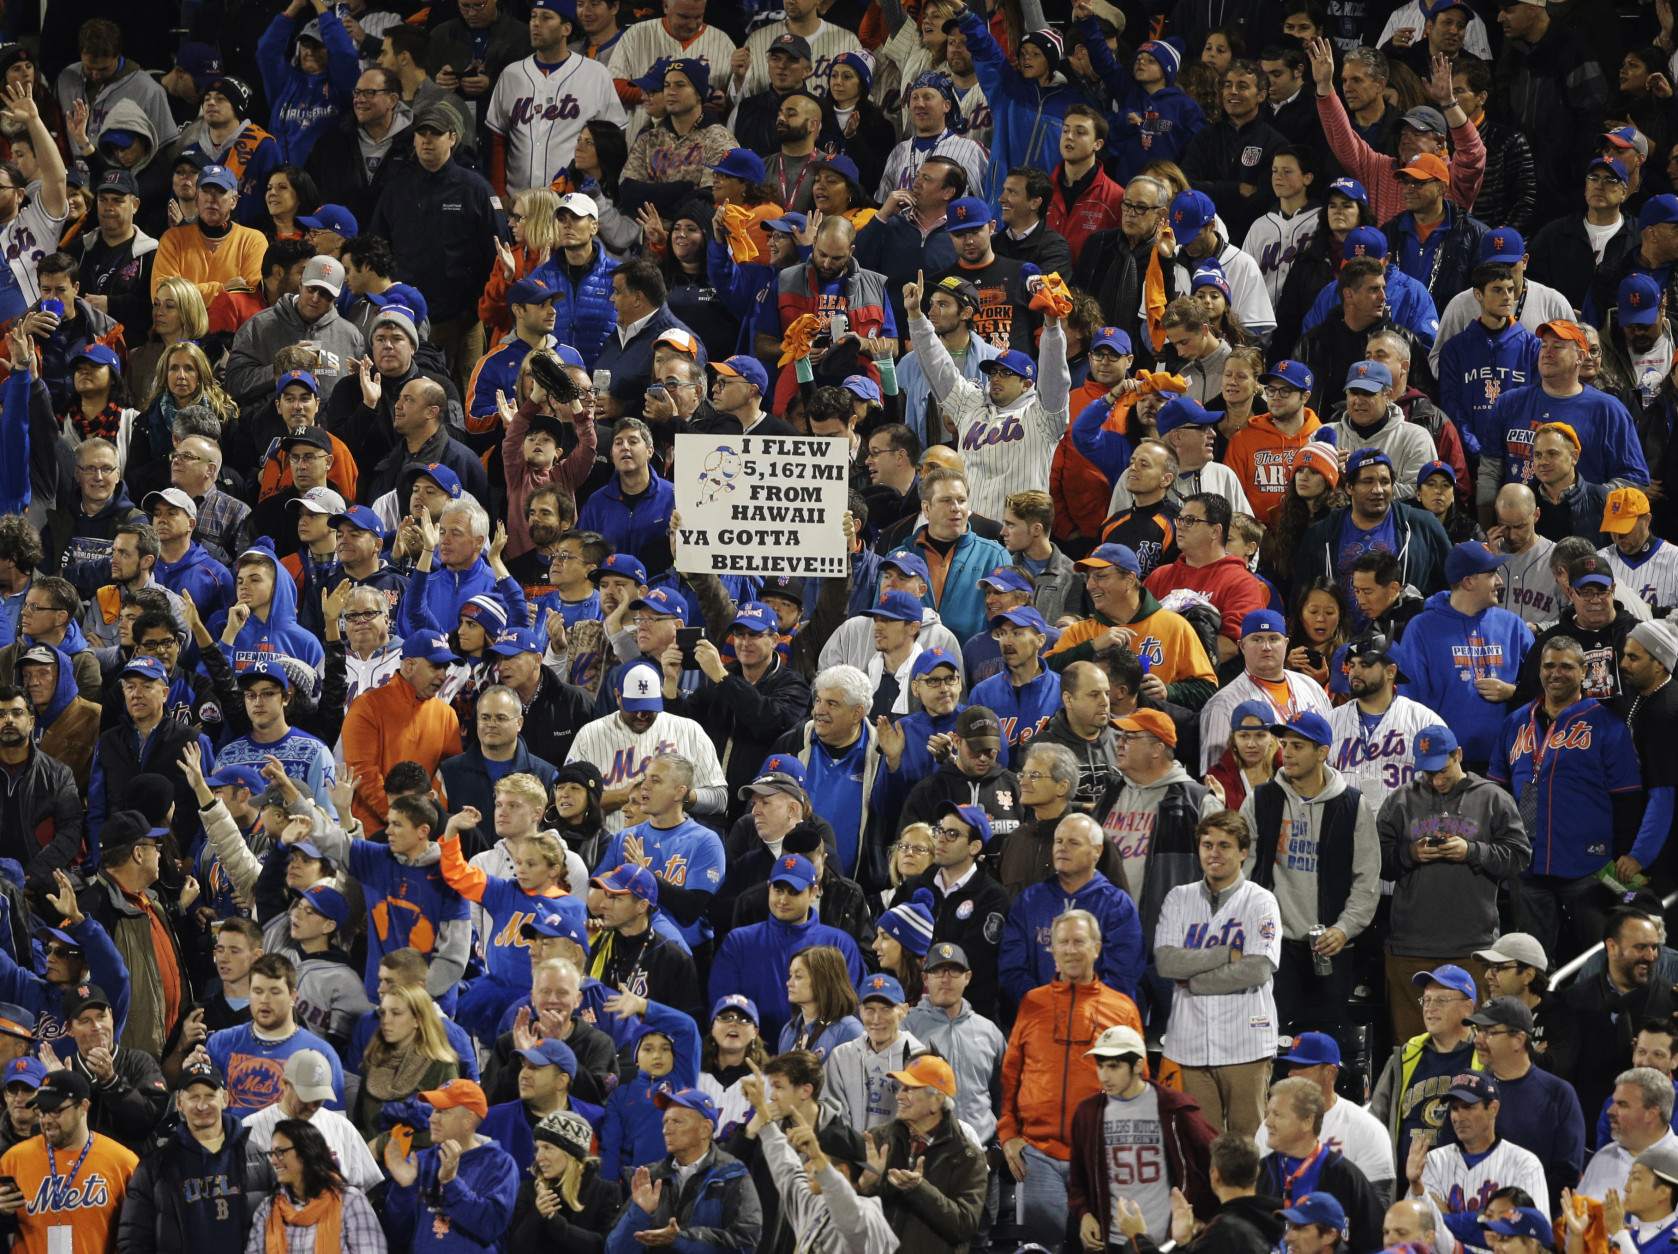 Spectators cheer during the seventh inning of Game 5 of the Major League Baseball World Series between the New York Mets and the Kansas City Royals Sunday, Nov. 1, 2015, in New York. (AP Photo/Julie Jacobson)